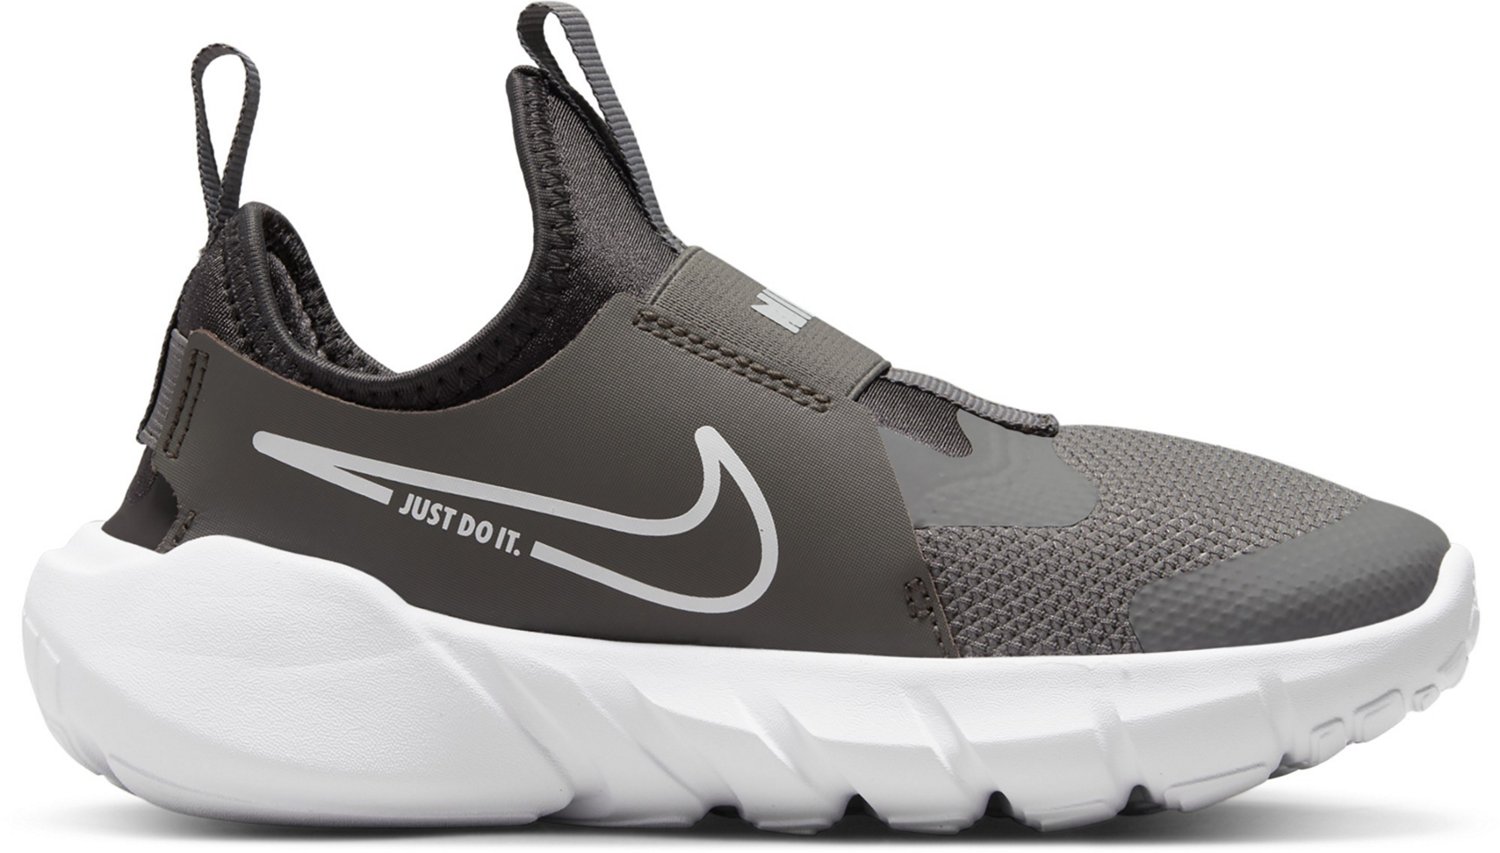 Nike Boys Running Shoes Only $19.98 (Regularly $40) at Academy